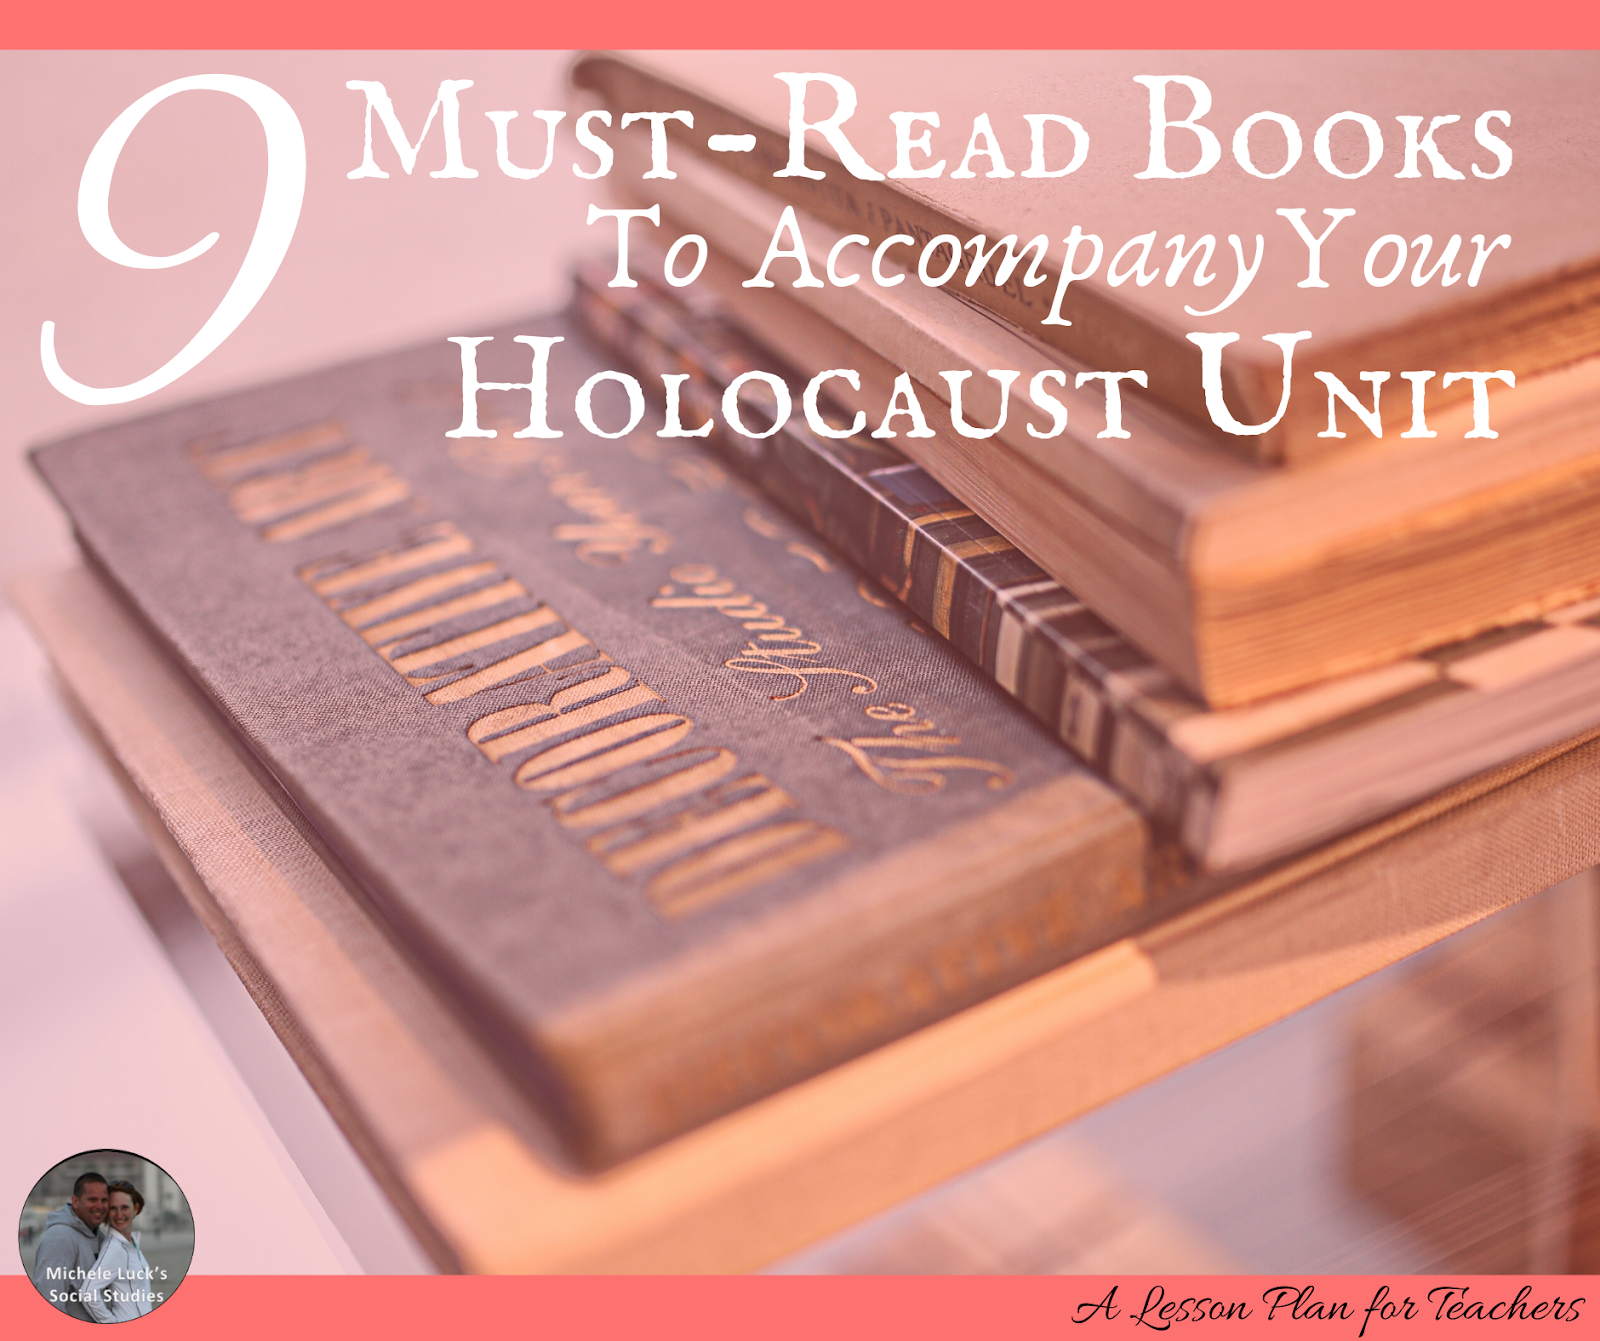 9 Must-Read Books to Accompany Your Holocaust Unit